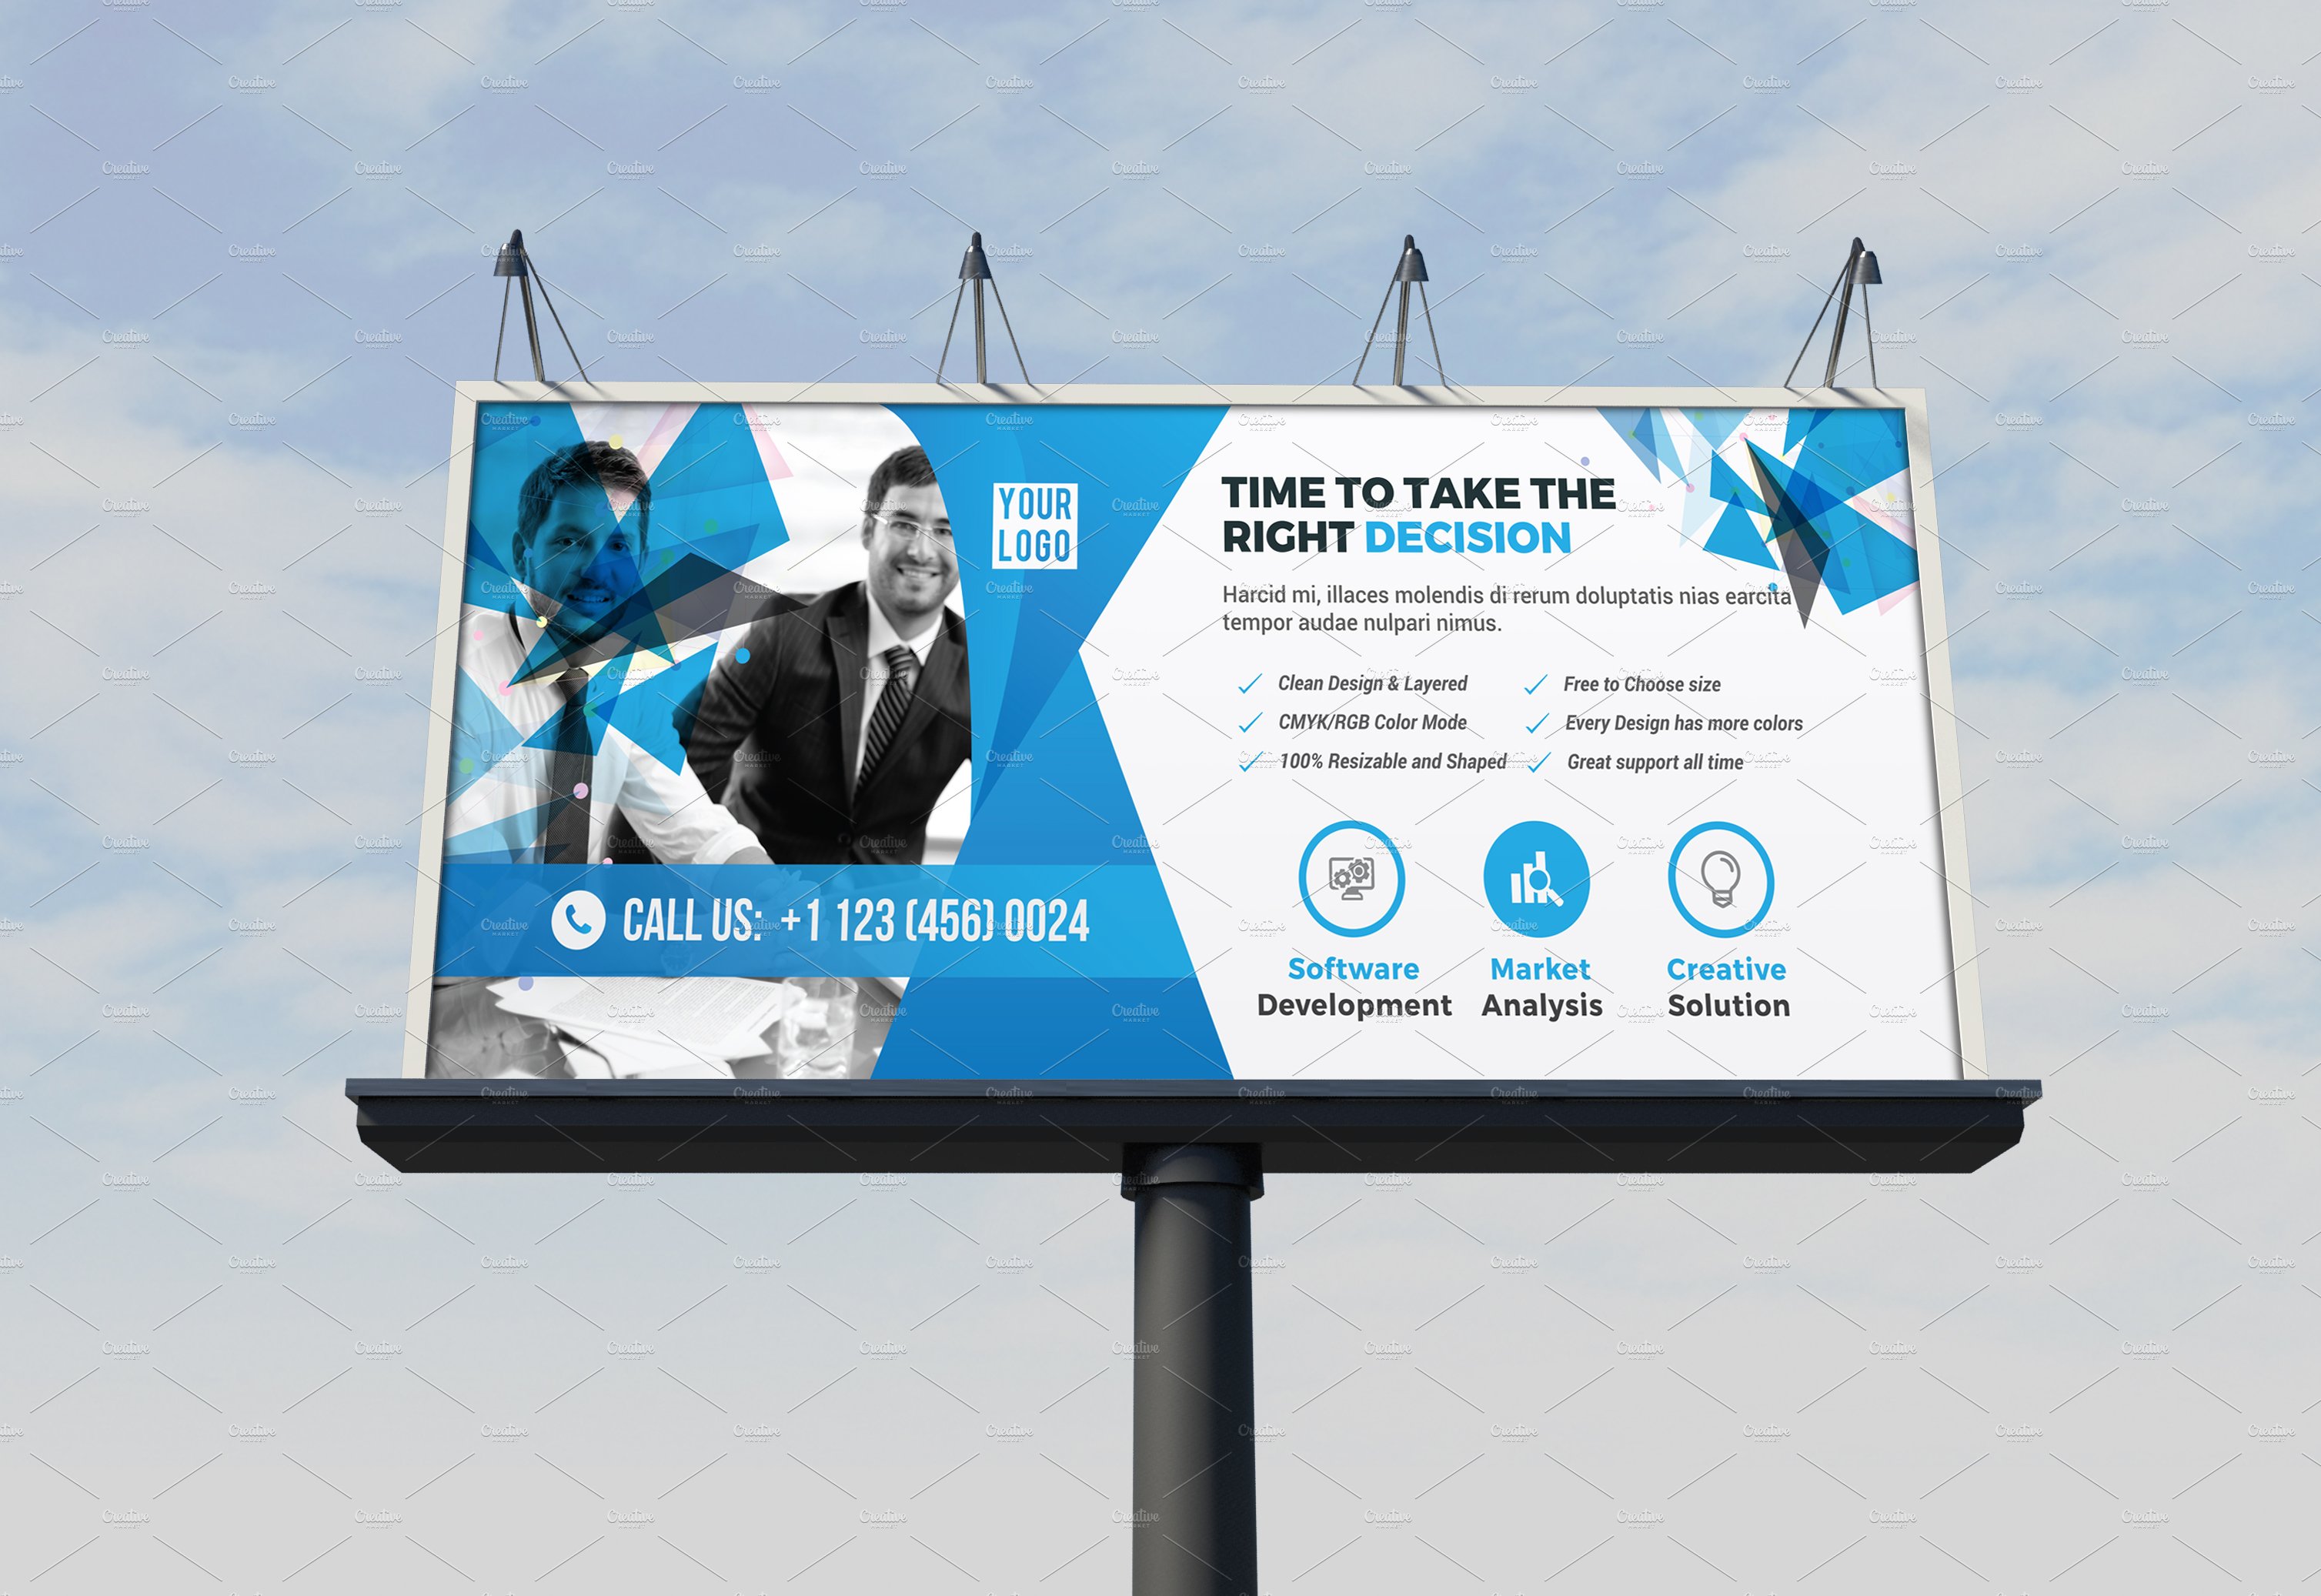 Billboard Template cover image.